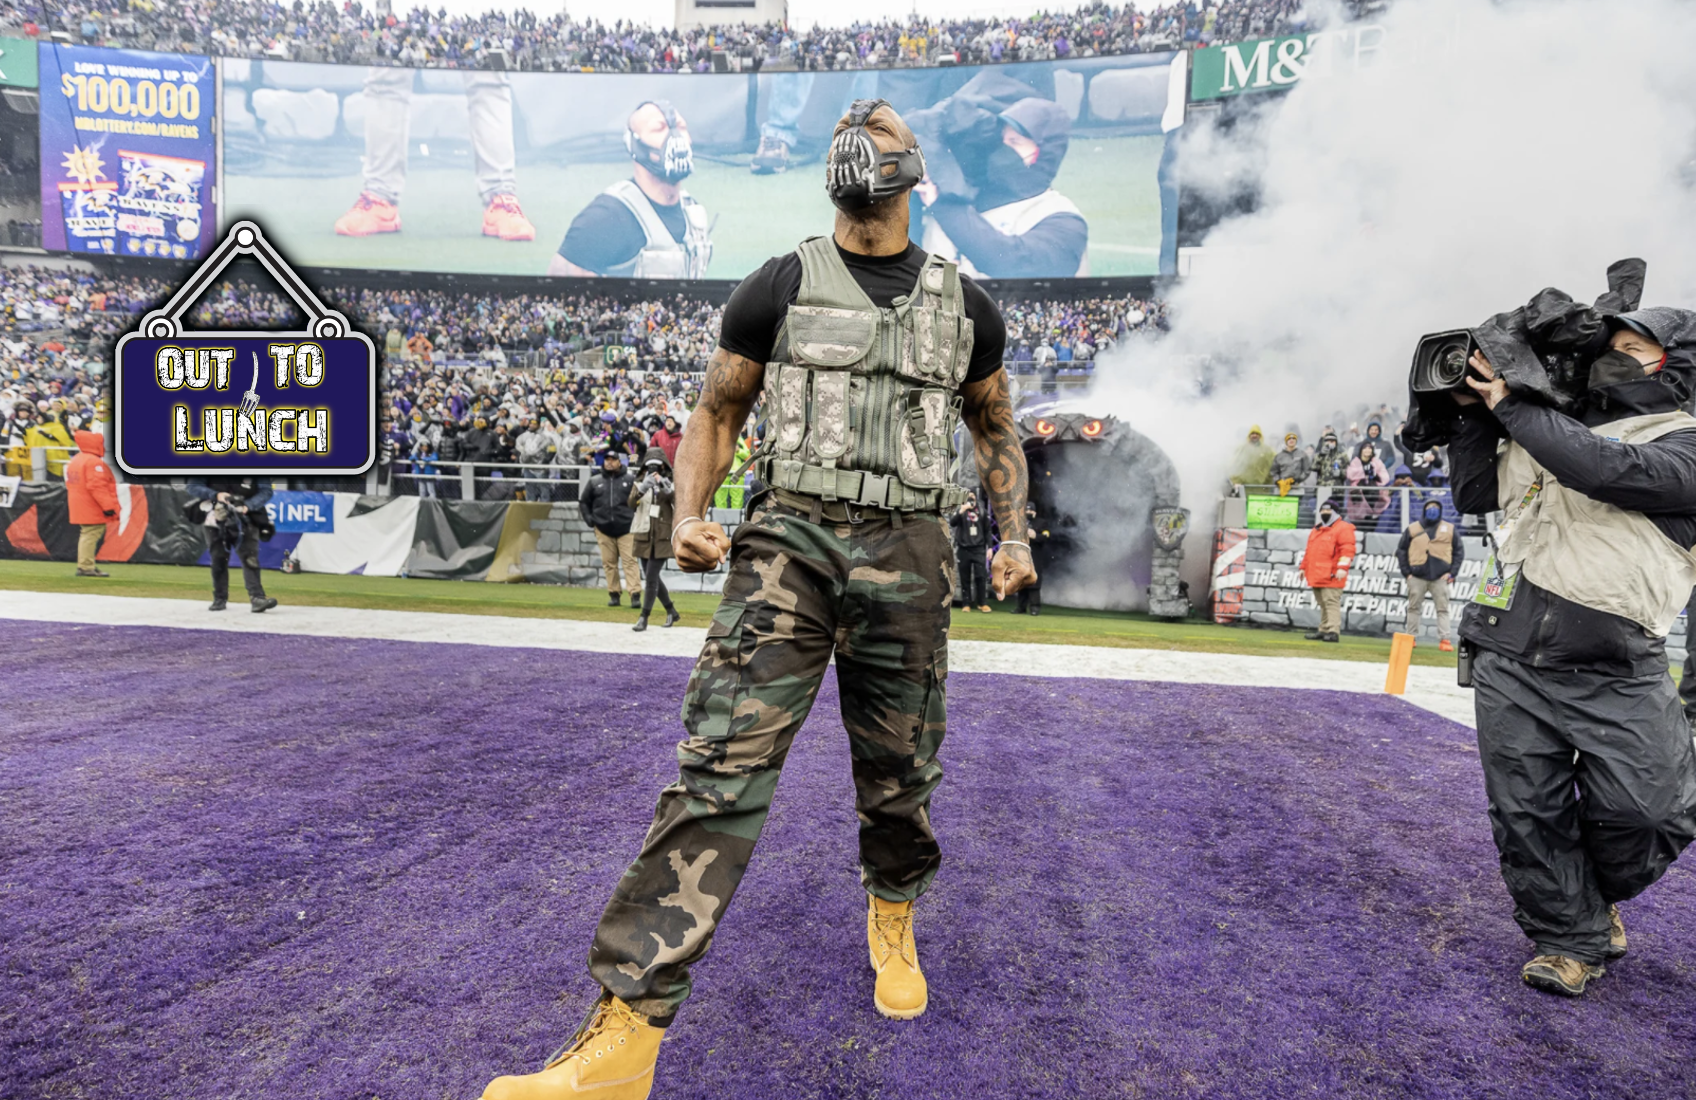 Terrell Suggs comes out in his bane mask and costume